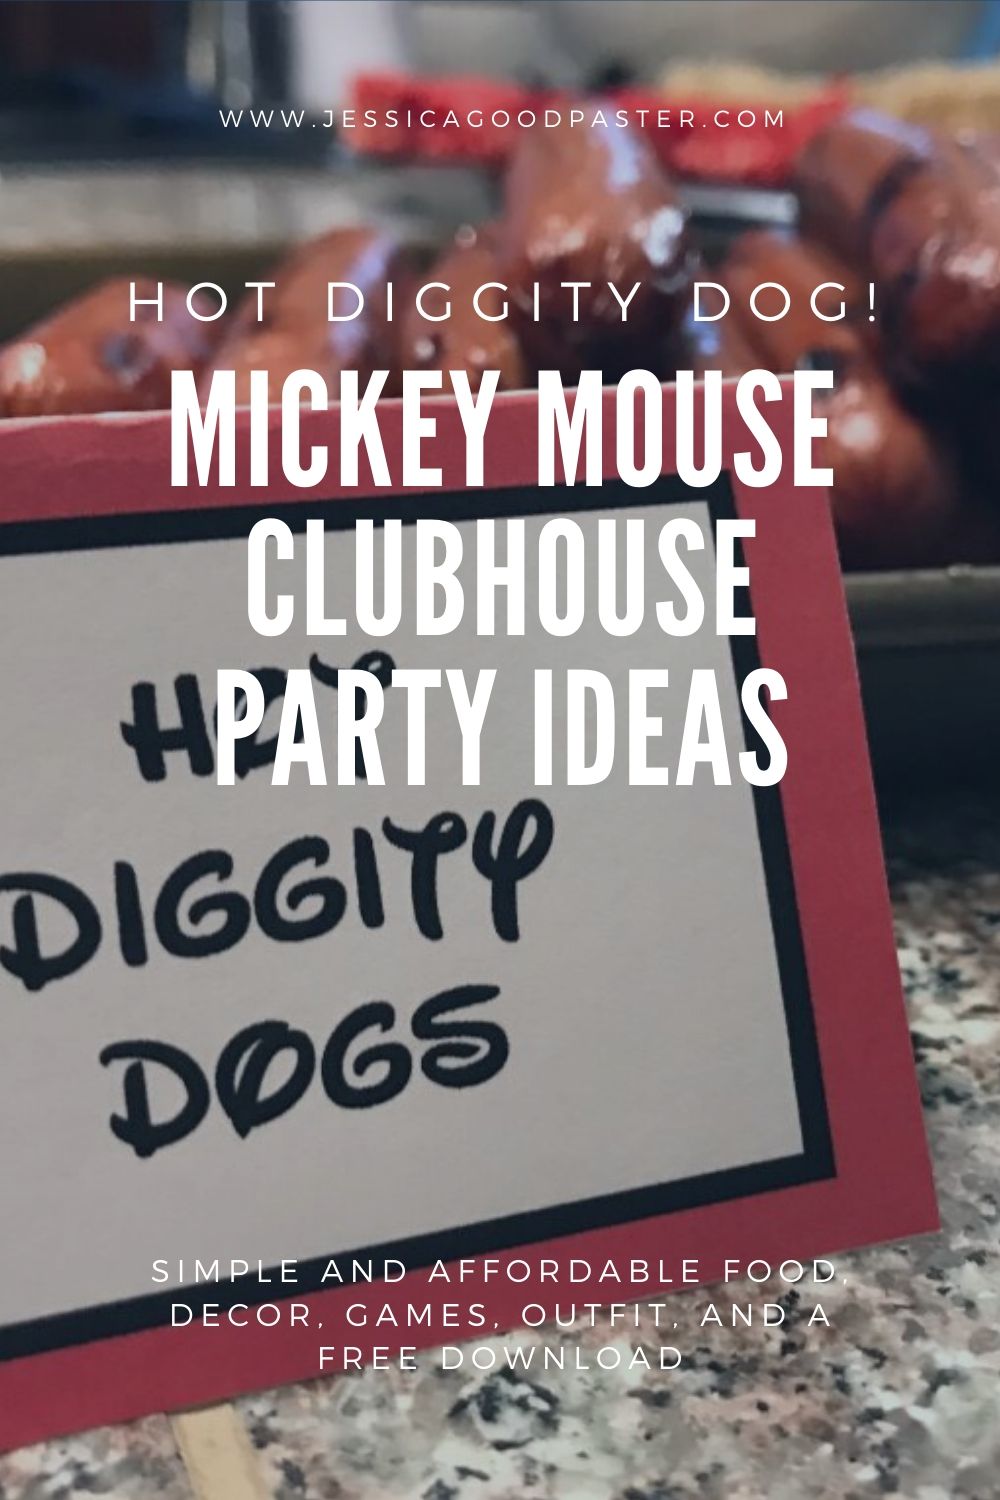 How to Host an Amazing Mickey Mouse Party on a Budget | Hot Diggity Dog Hot Dogs! Tons of affordable options for Mickey or Minnie parties including food ideas, decorations, outfits, games, party supplies, and free printables! Your Mickey Mouse Clubhouse fan will have a great birthday ! #mickeyparty #mickeymouse #mickeymouseparty #minnieparty #birthday #mickeymouseclubhouse #mickeyprintables